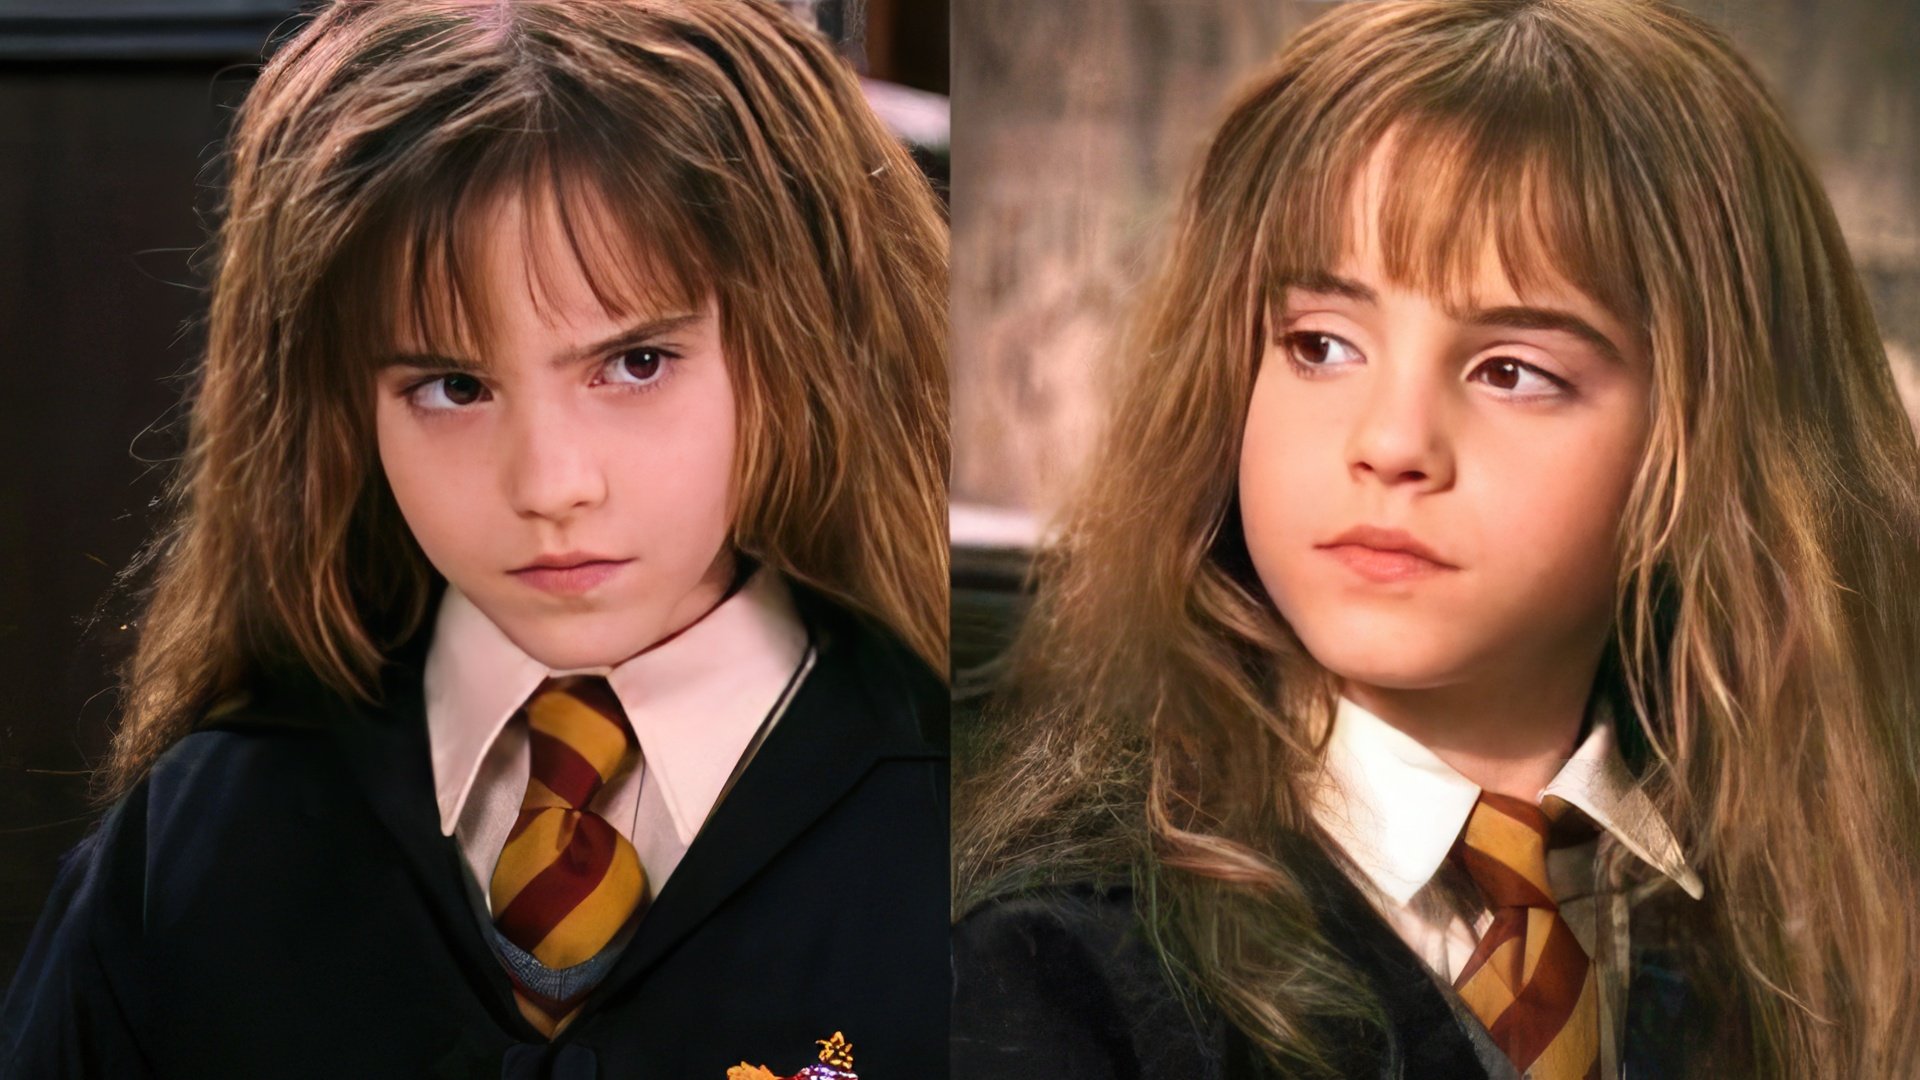 Little Hermione Granger charmed the audience